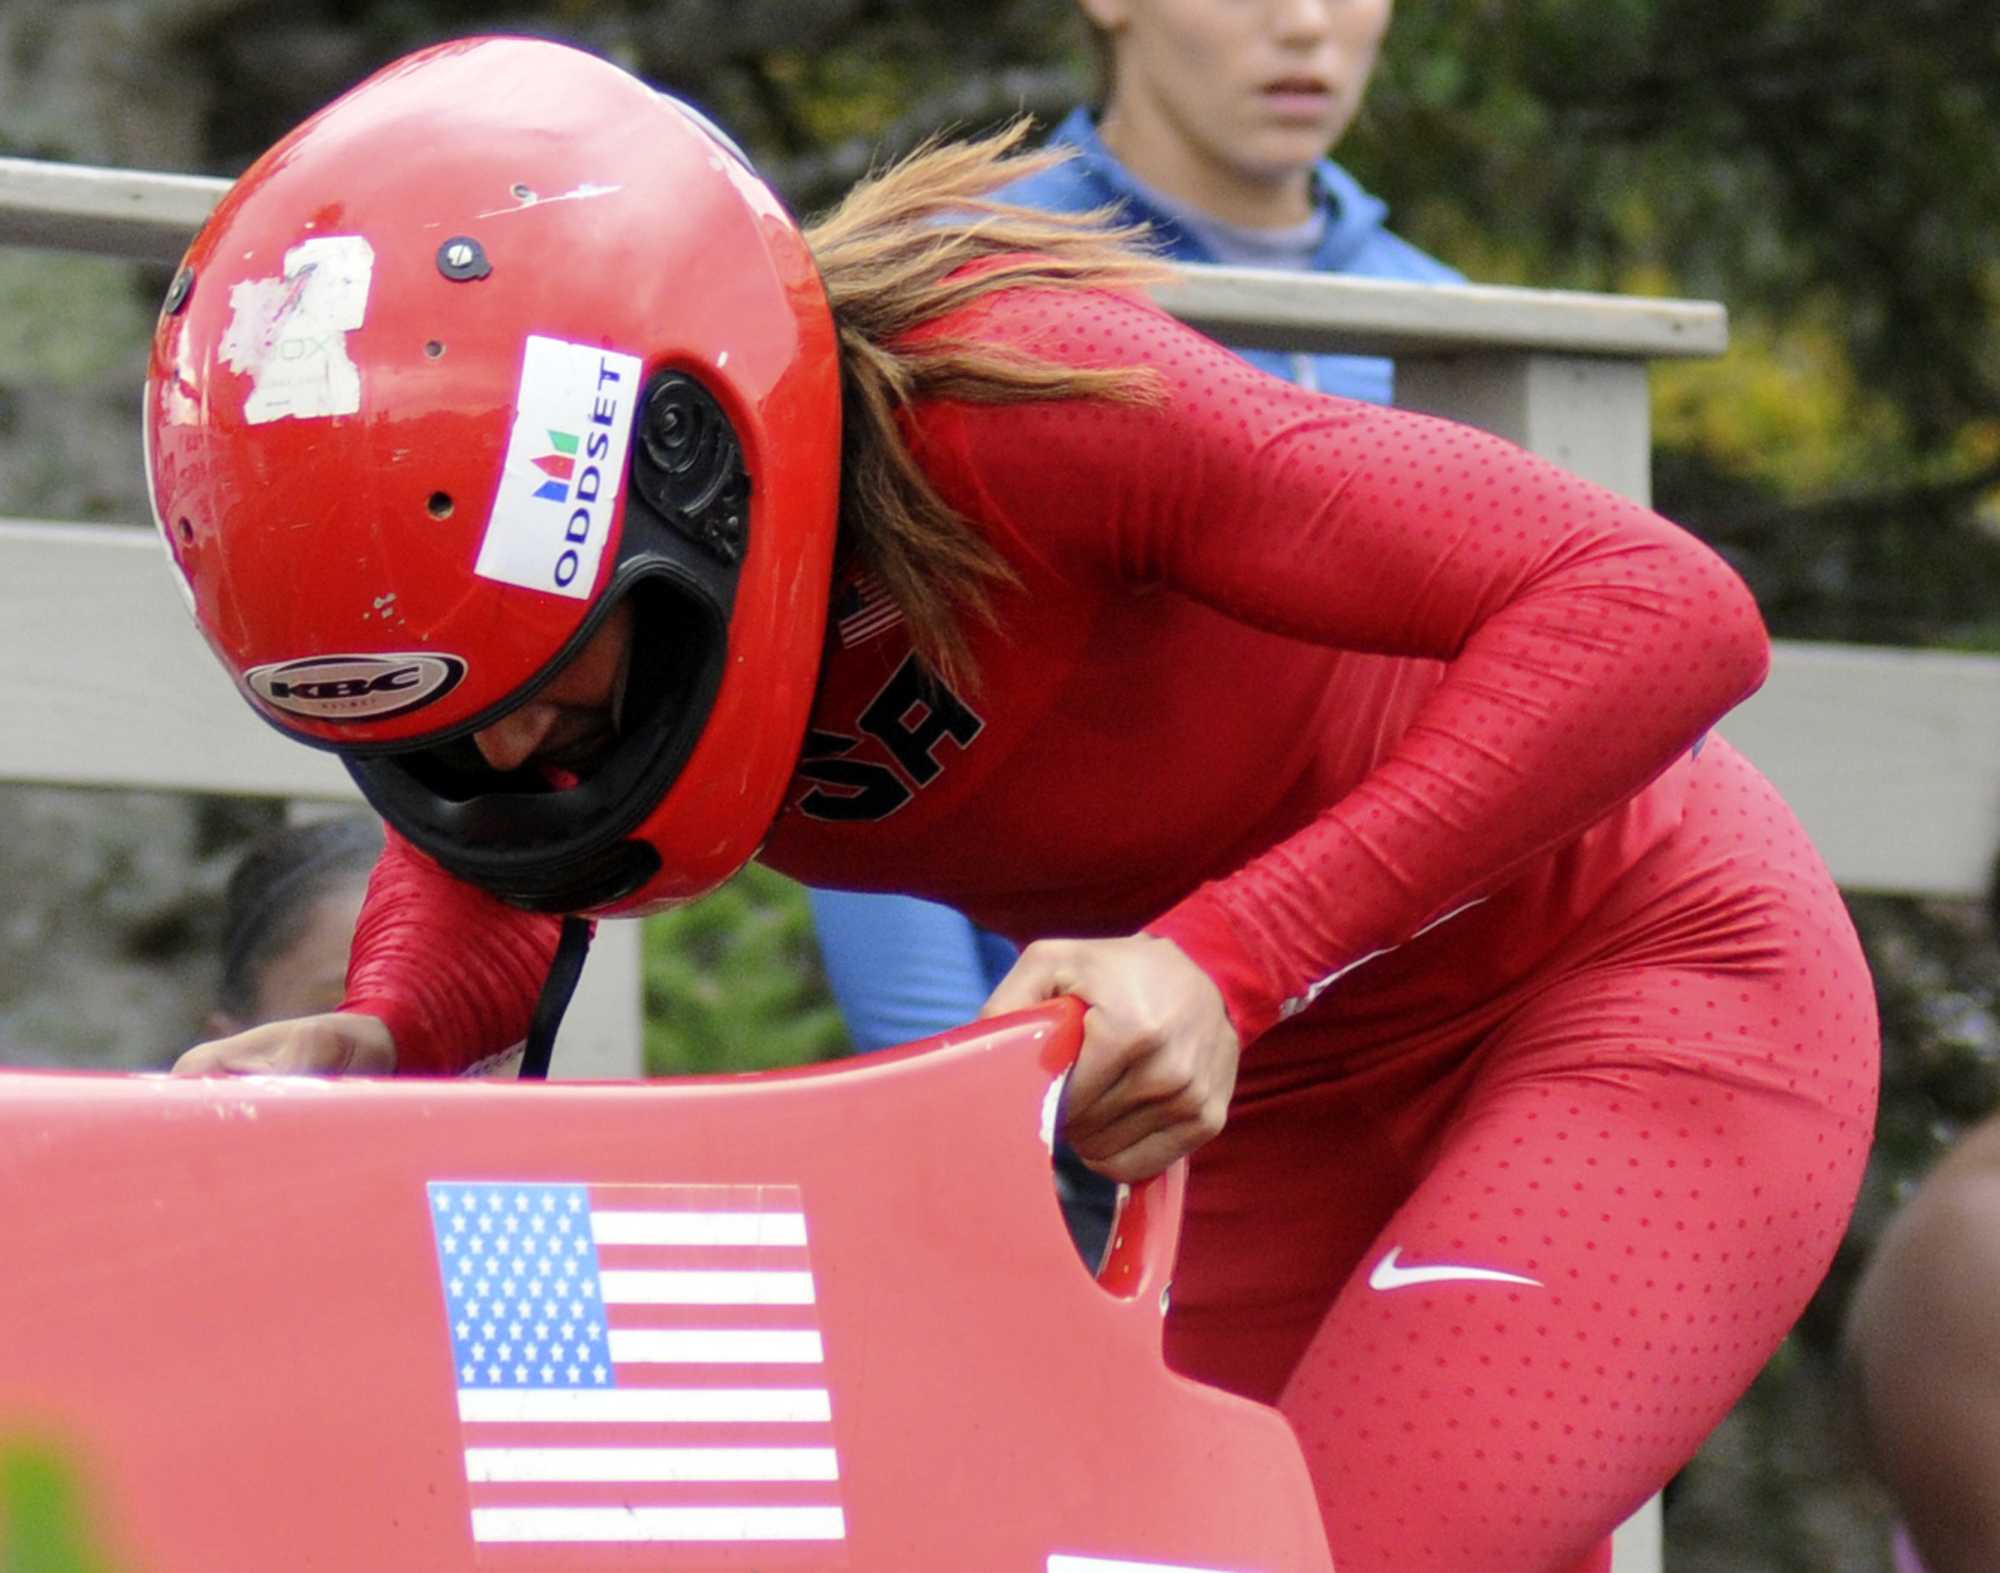 Lolo Jones selected to U.S. bobsled team - Times Union2000 x 1573